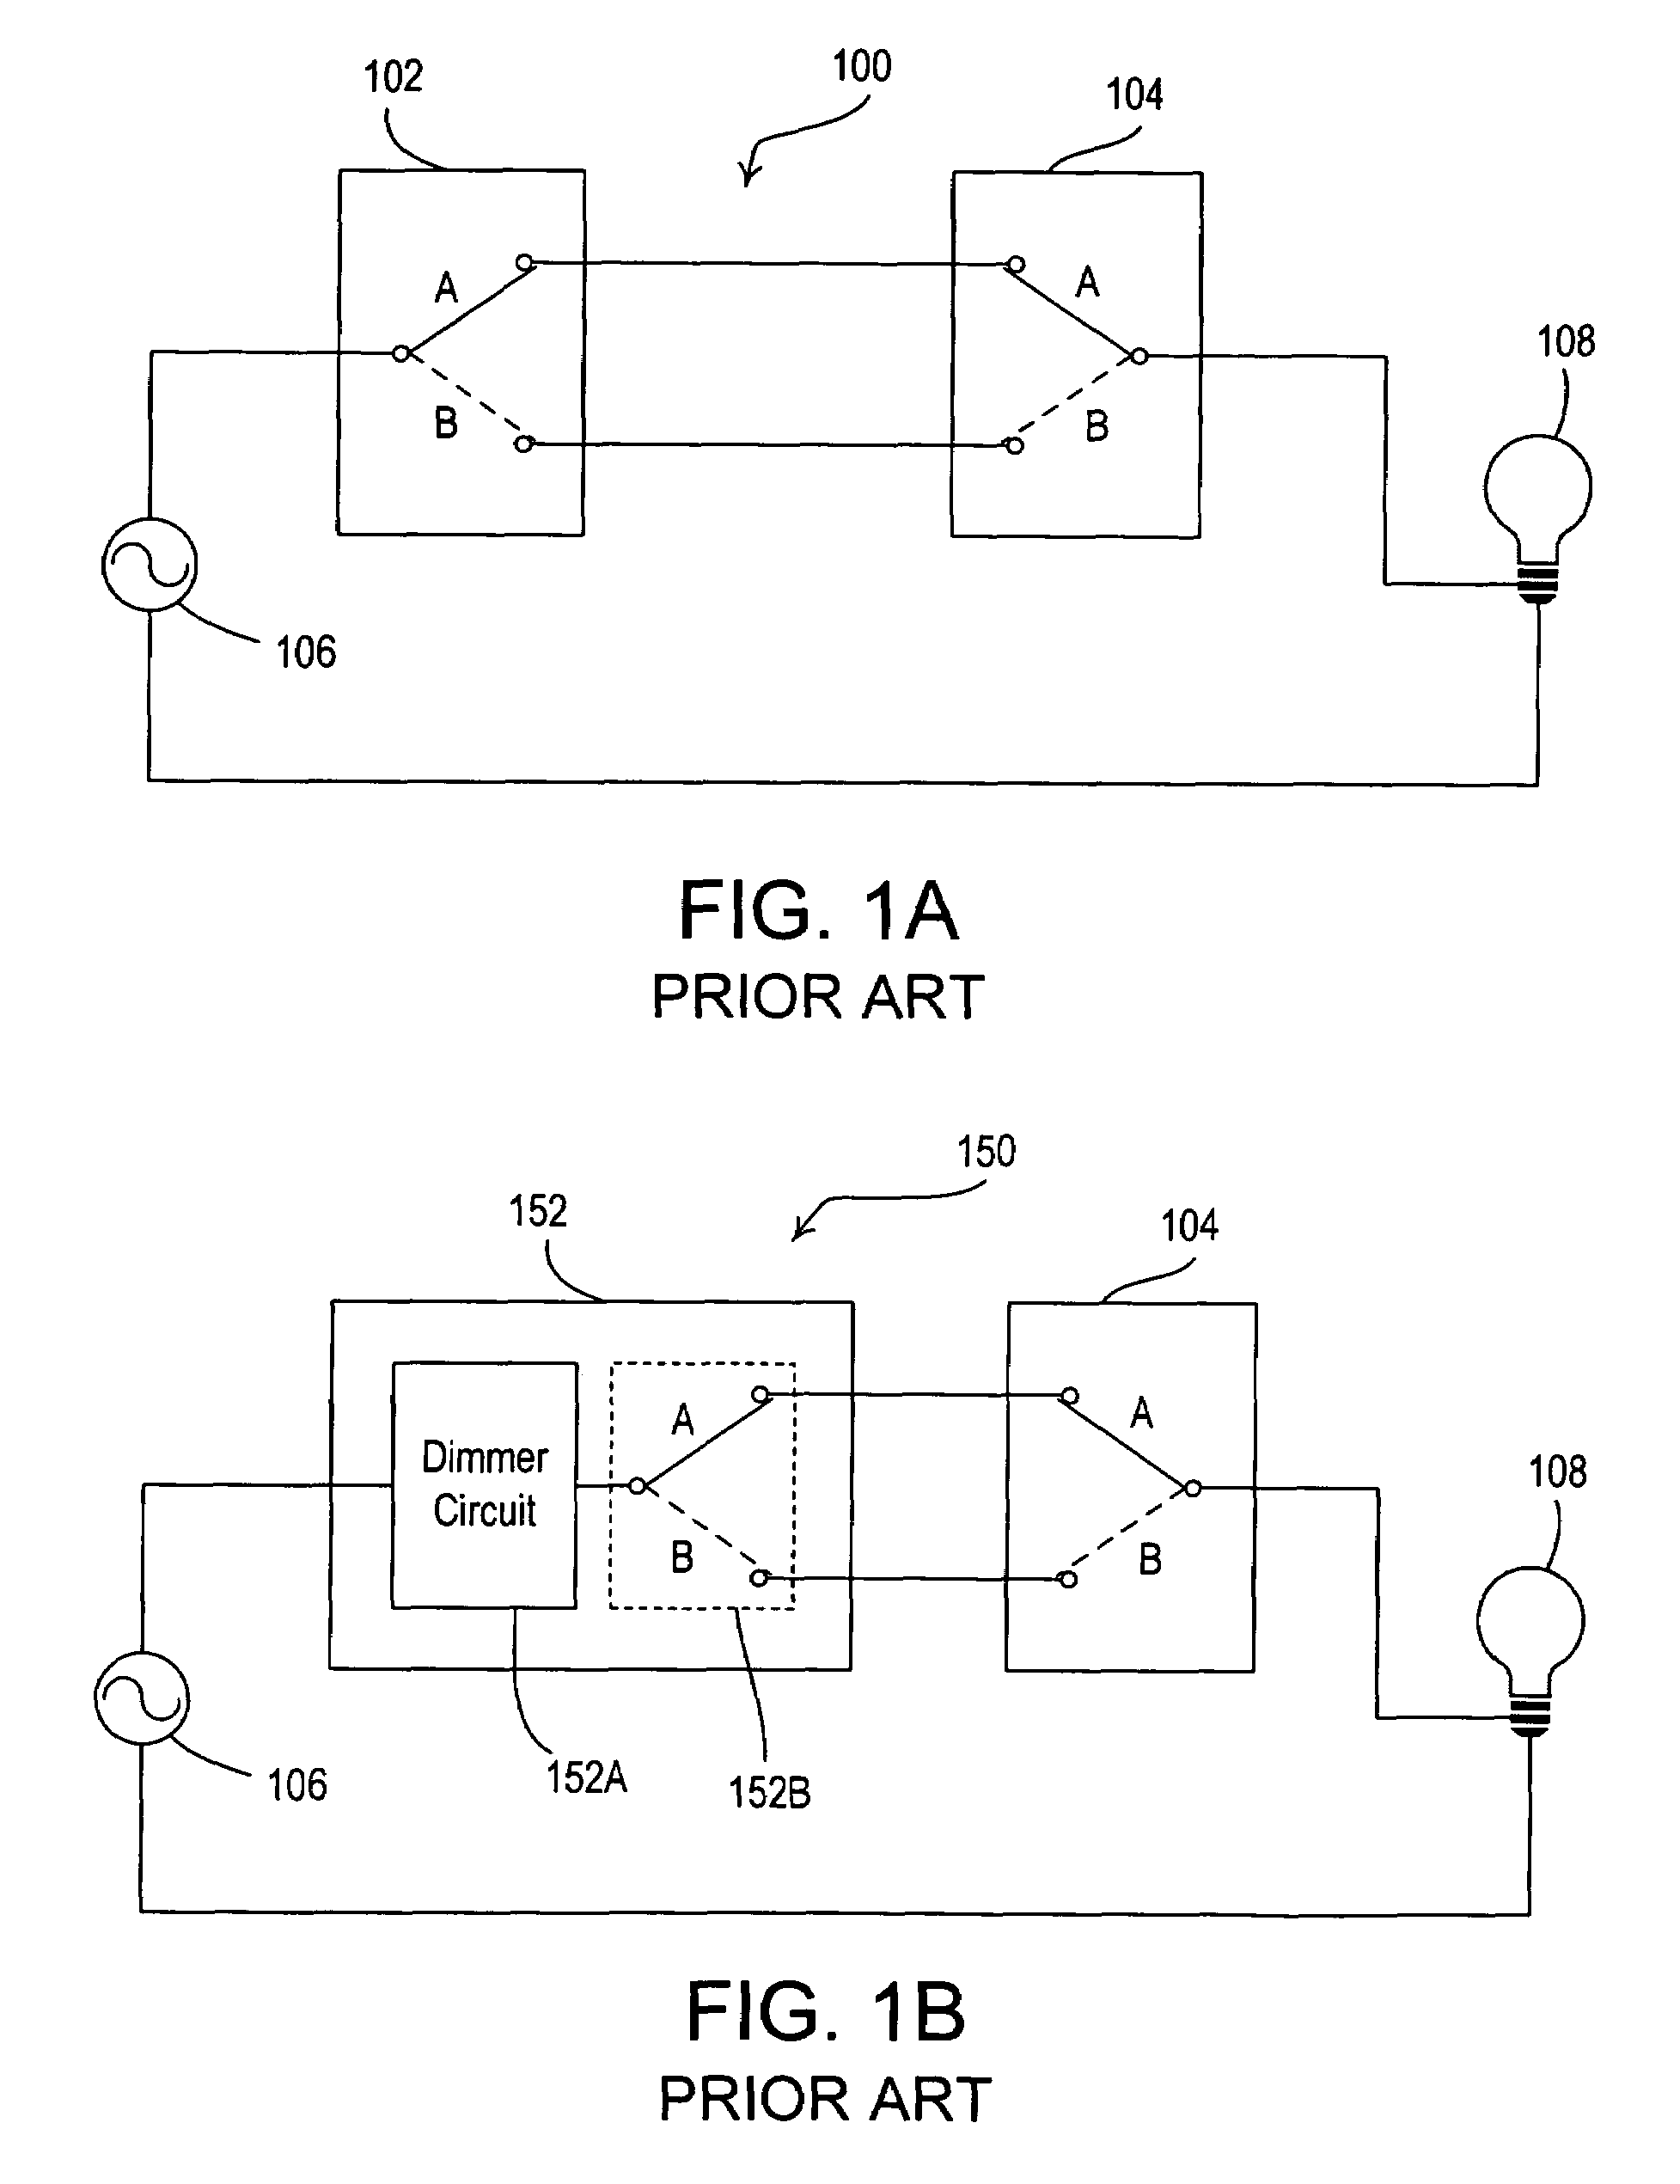 Dimmer switch for use with lighting circuits having three-way switches